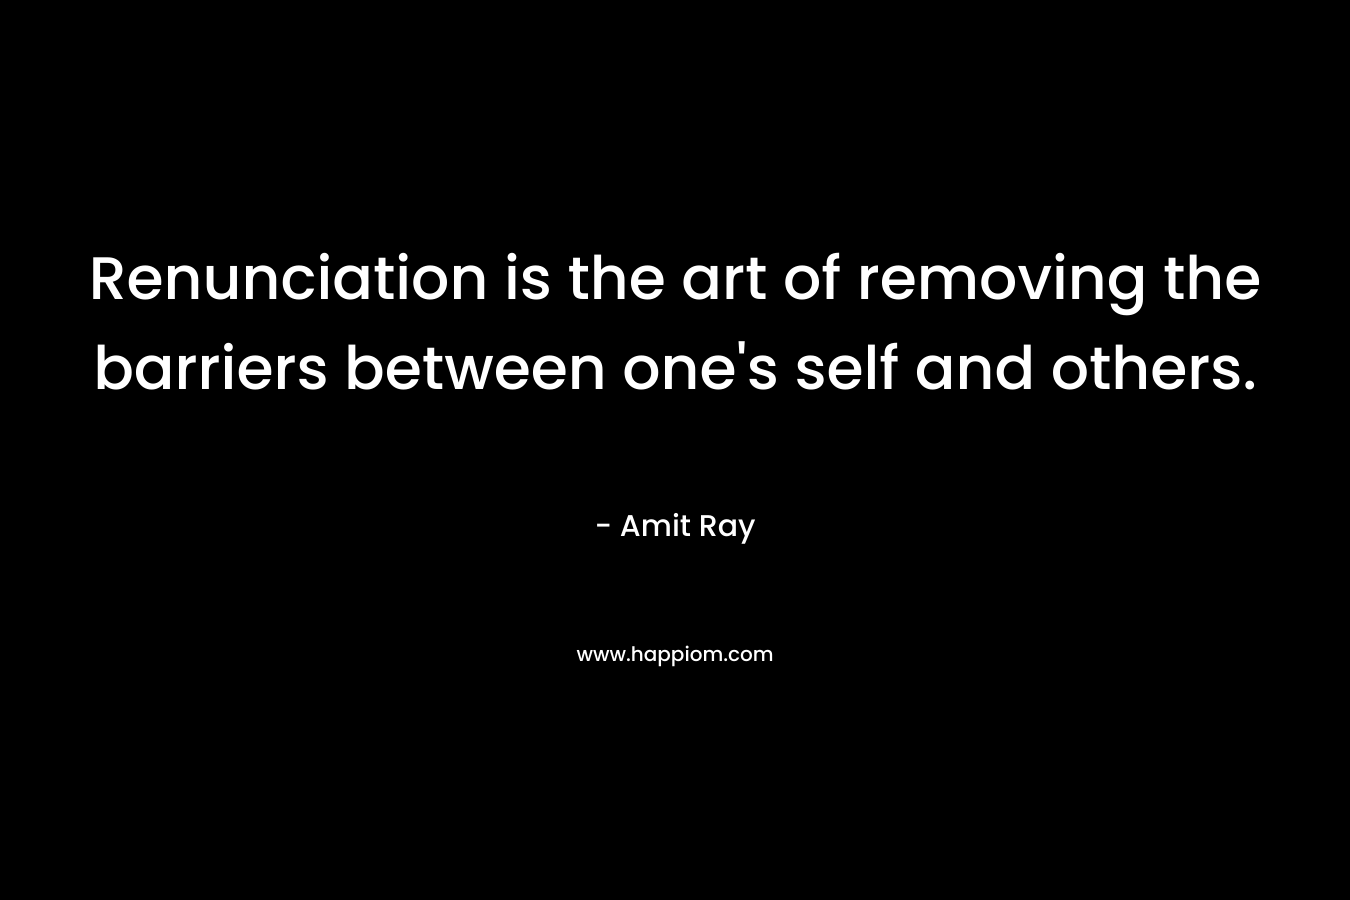 Renunciation is the art of removing the barriers between one’s self and others. – Amit Ray